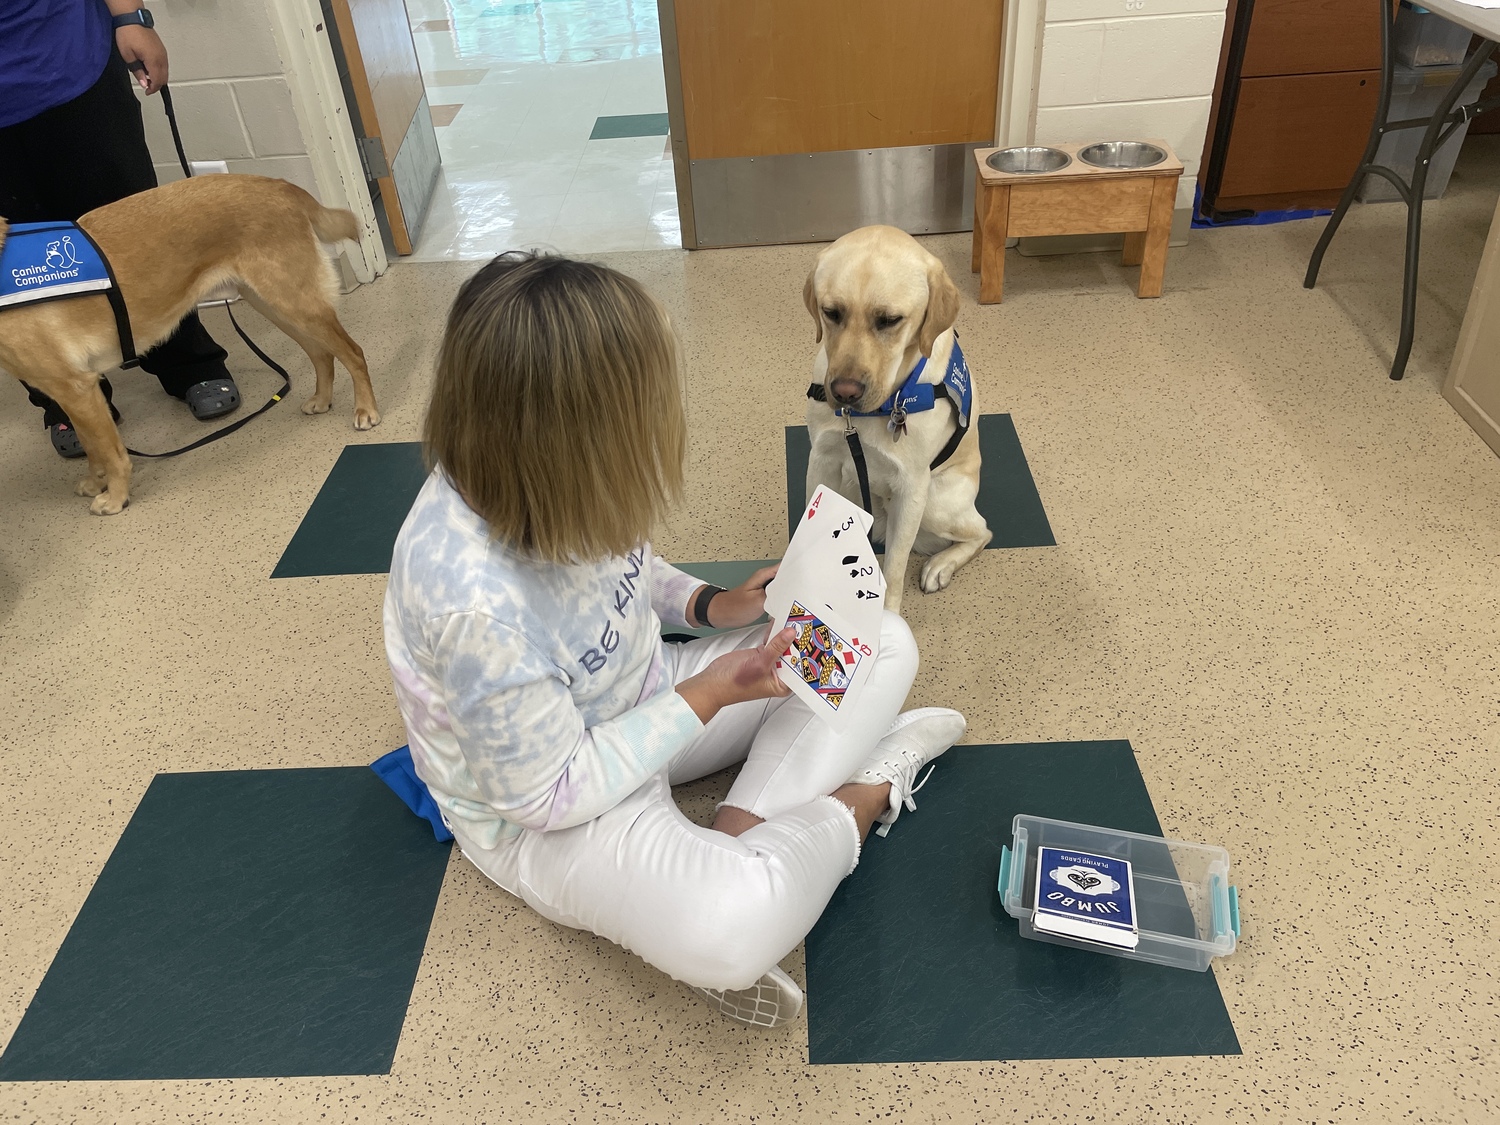 Kate Swezey, a social worker in Westhampton Beach Middle School, with Oric, a dog came to her through the organization Canine Companions, and will serve as a facility dog.